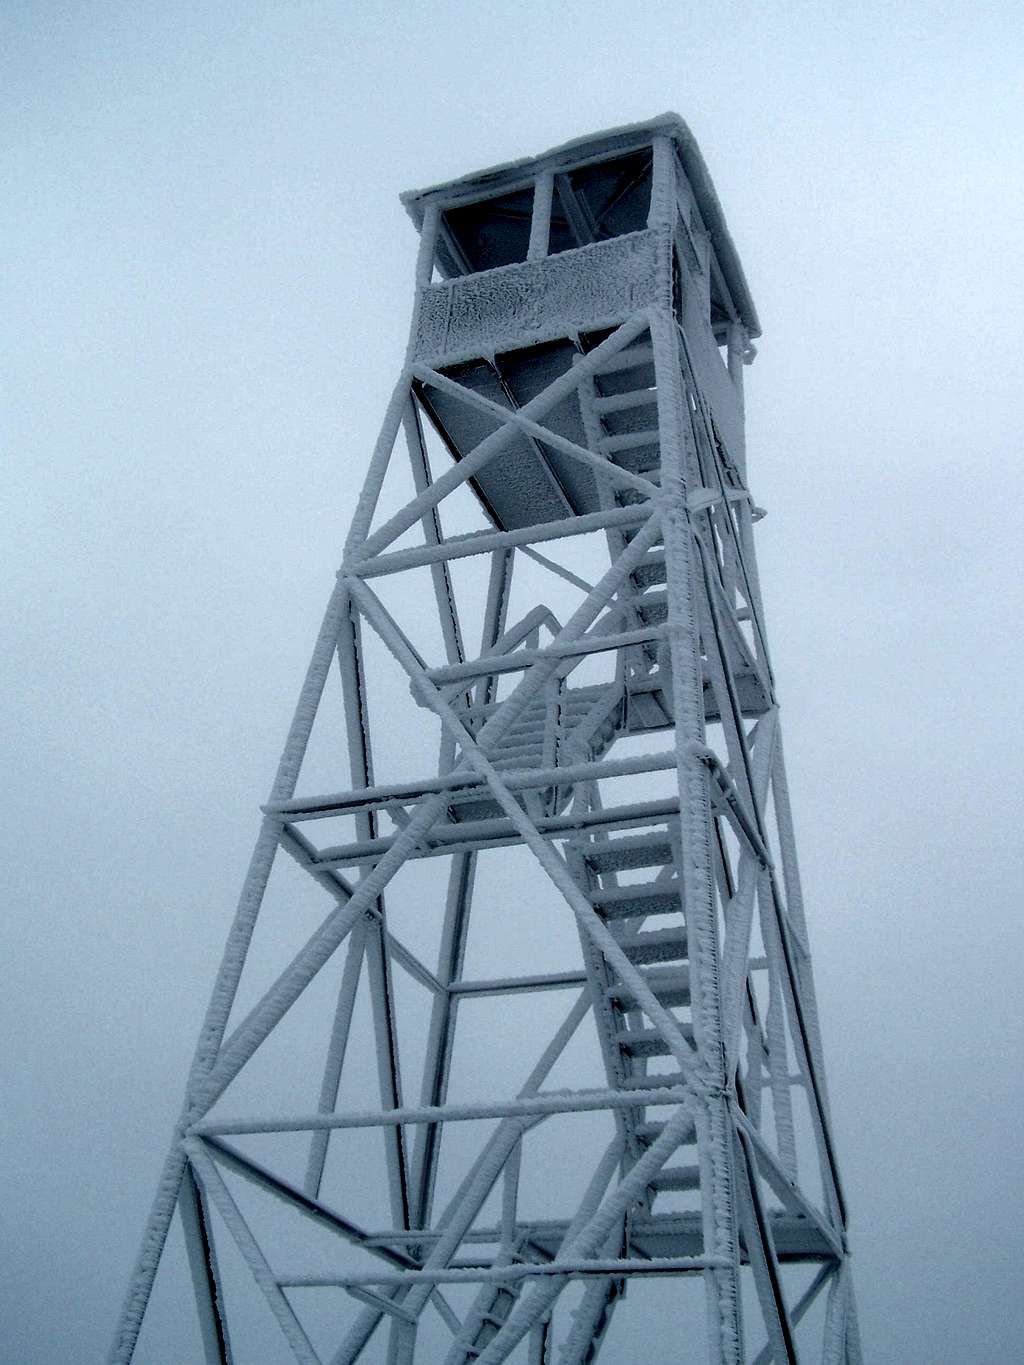 Hurricane Mtn. Fire Tower in Ice